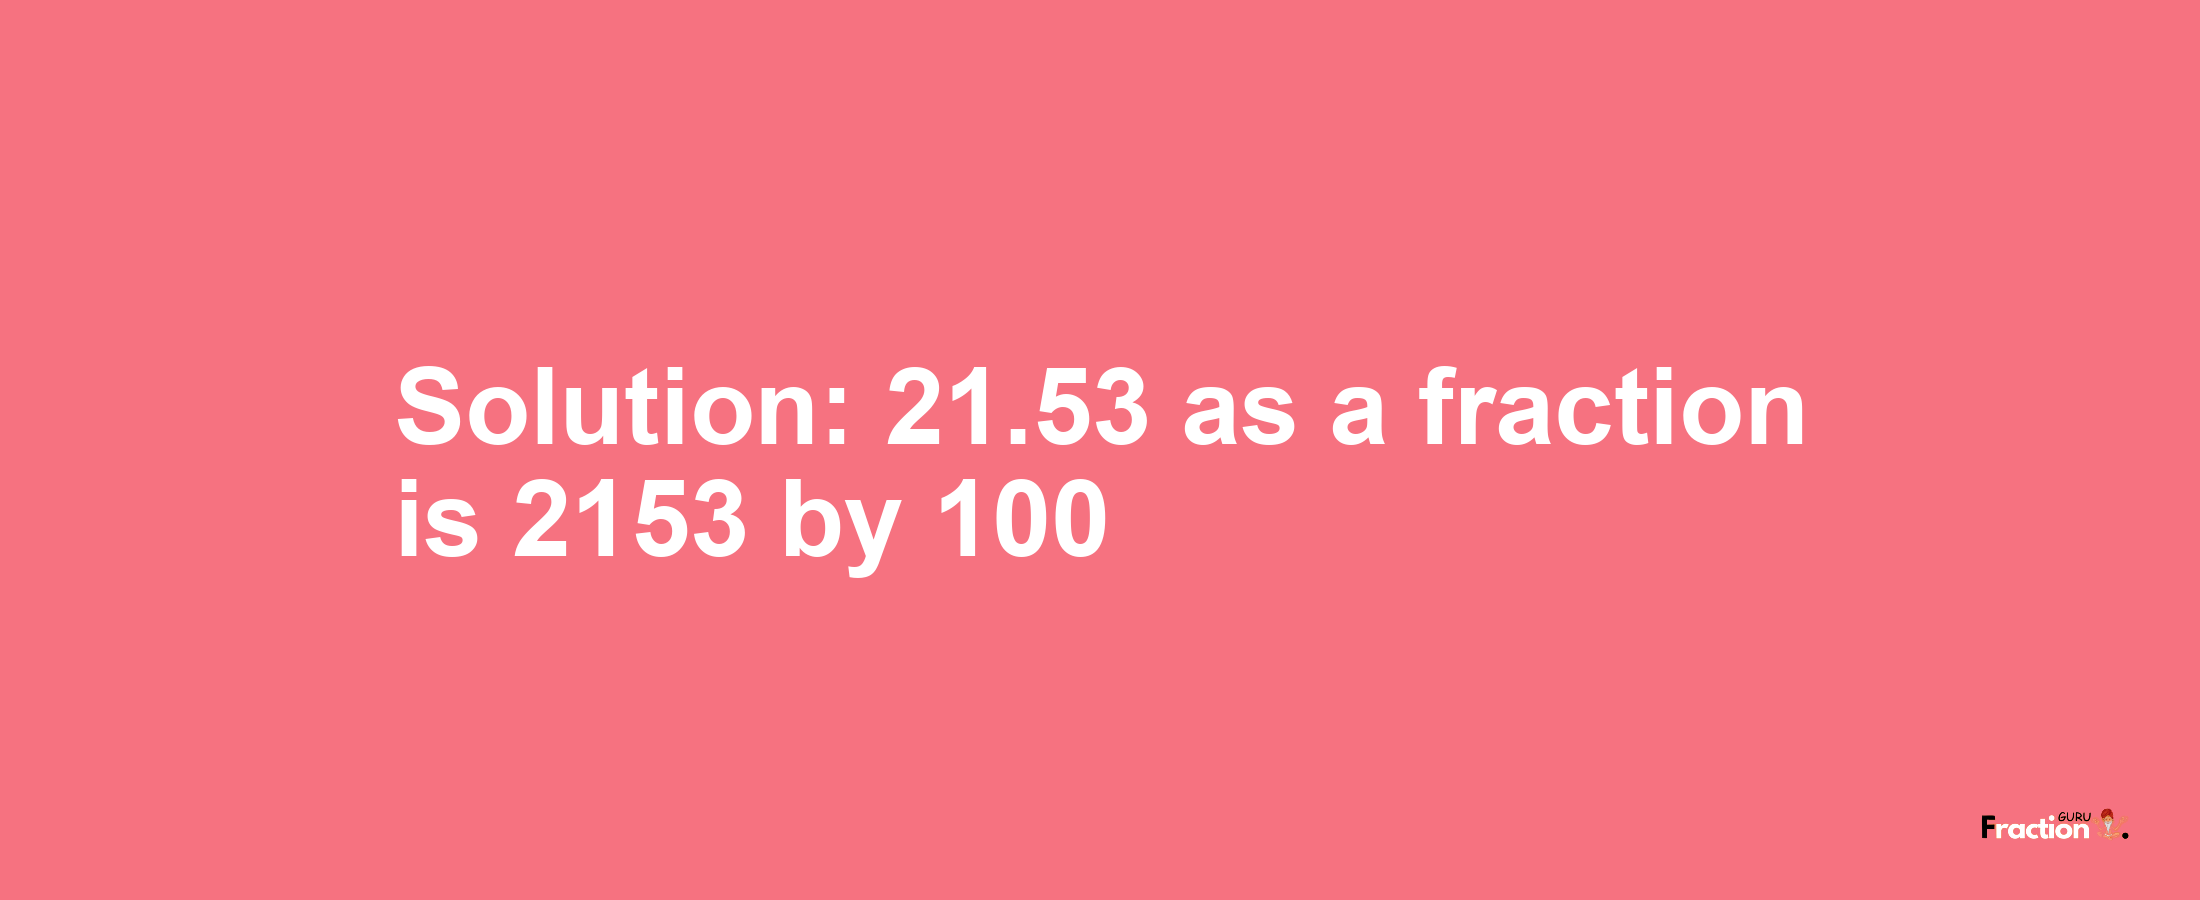 Solution:21.53 as a fraction is 2153/100